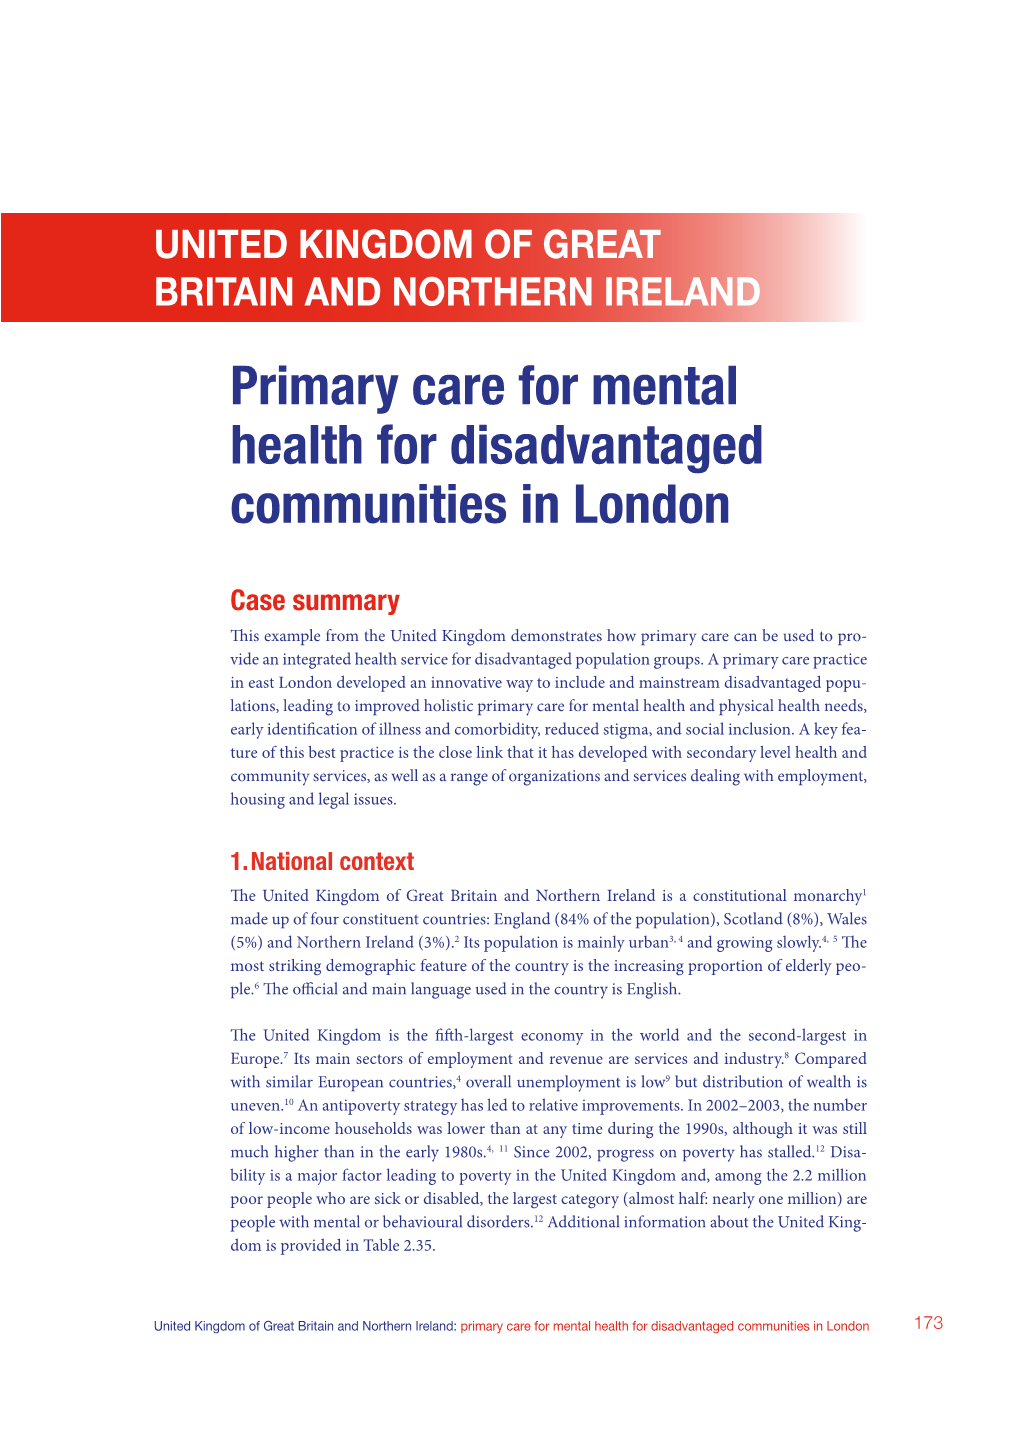 Primary Care for Mental Health for Disadvantaged Communities in London